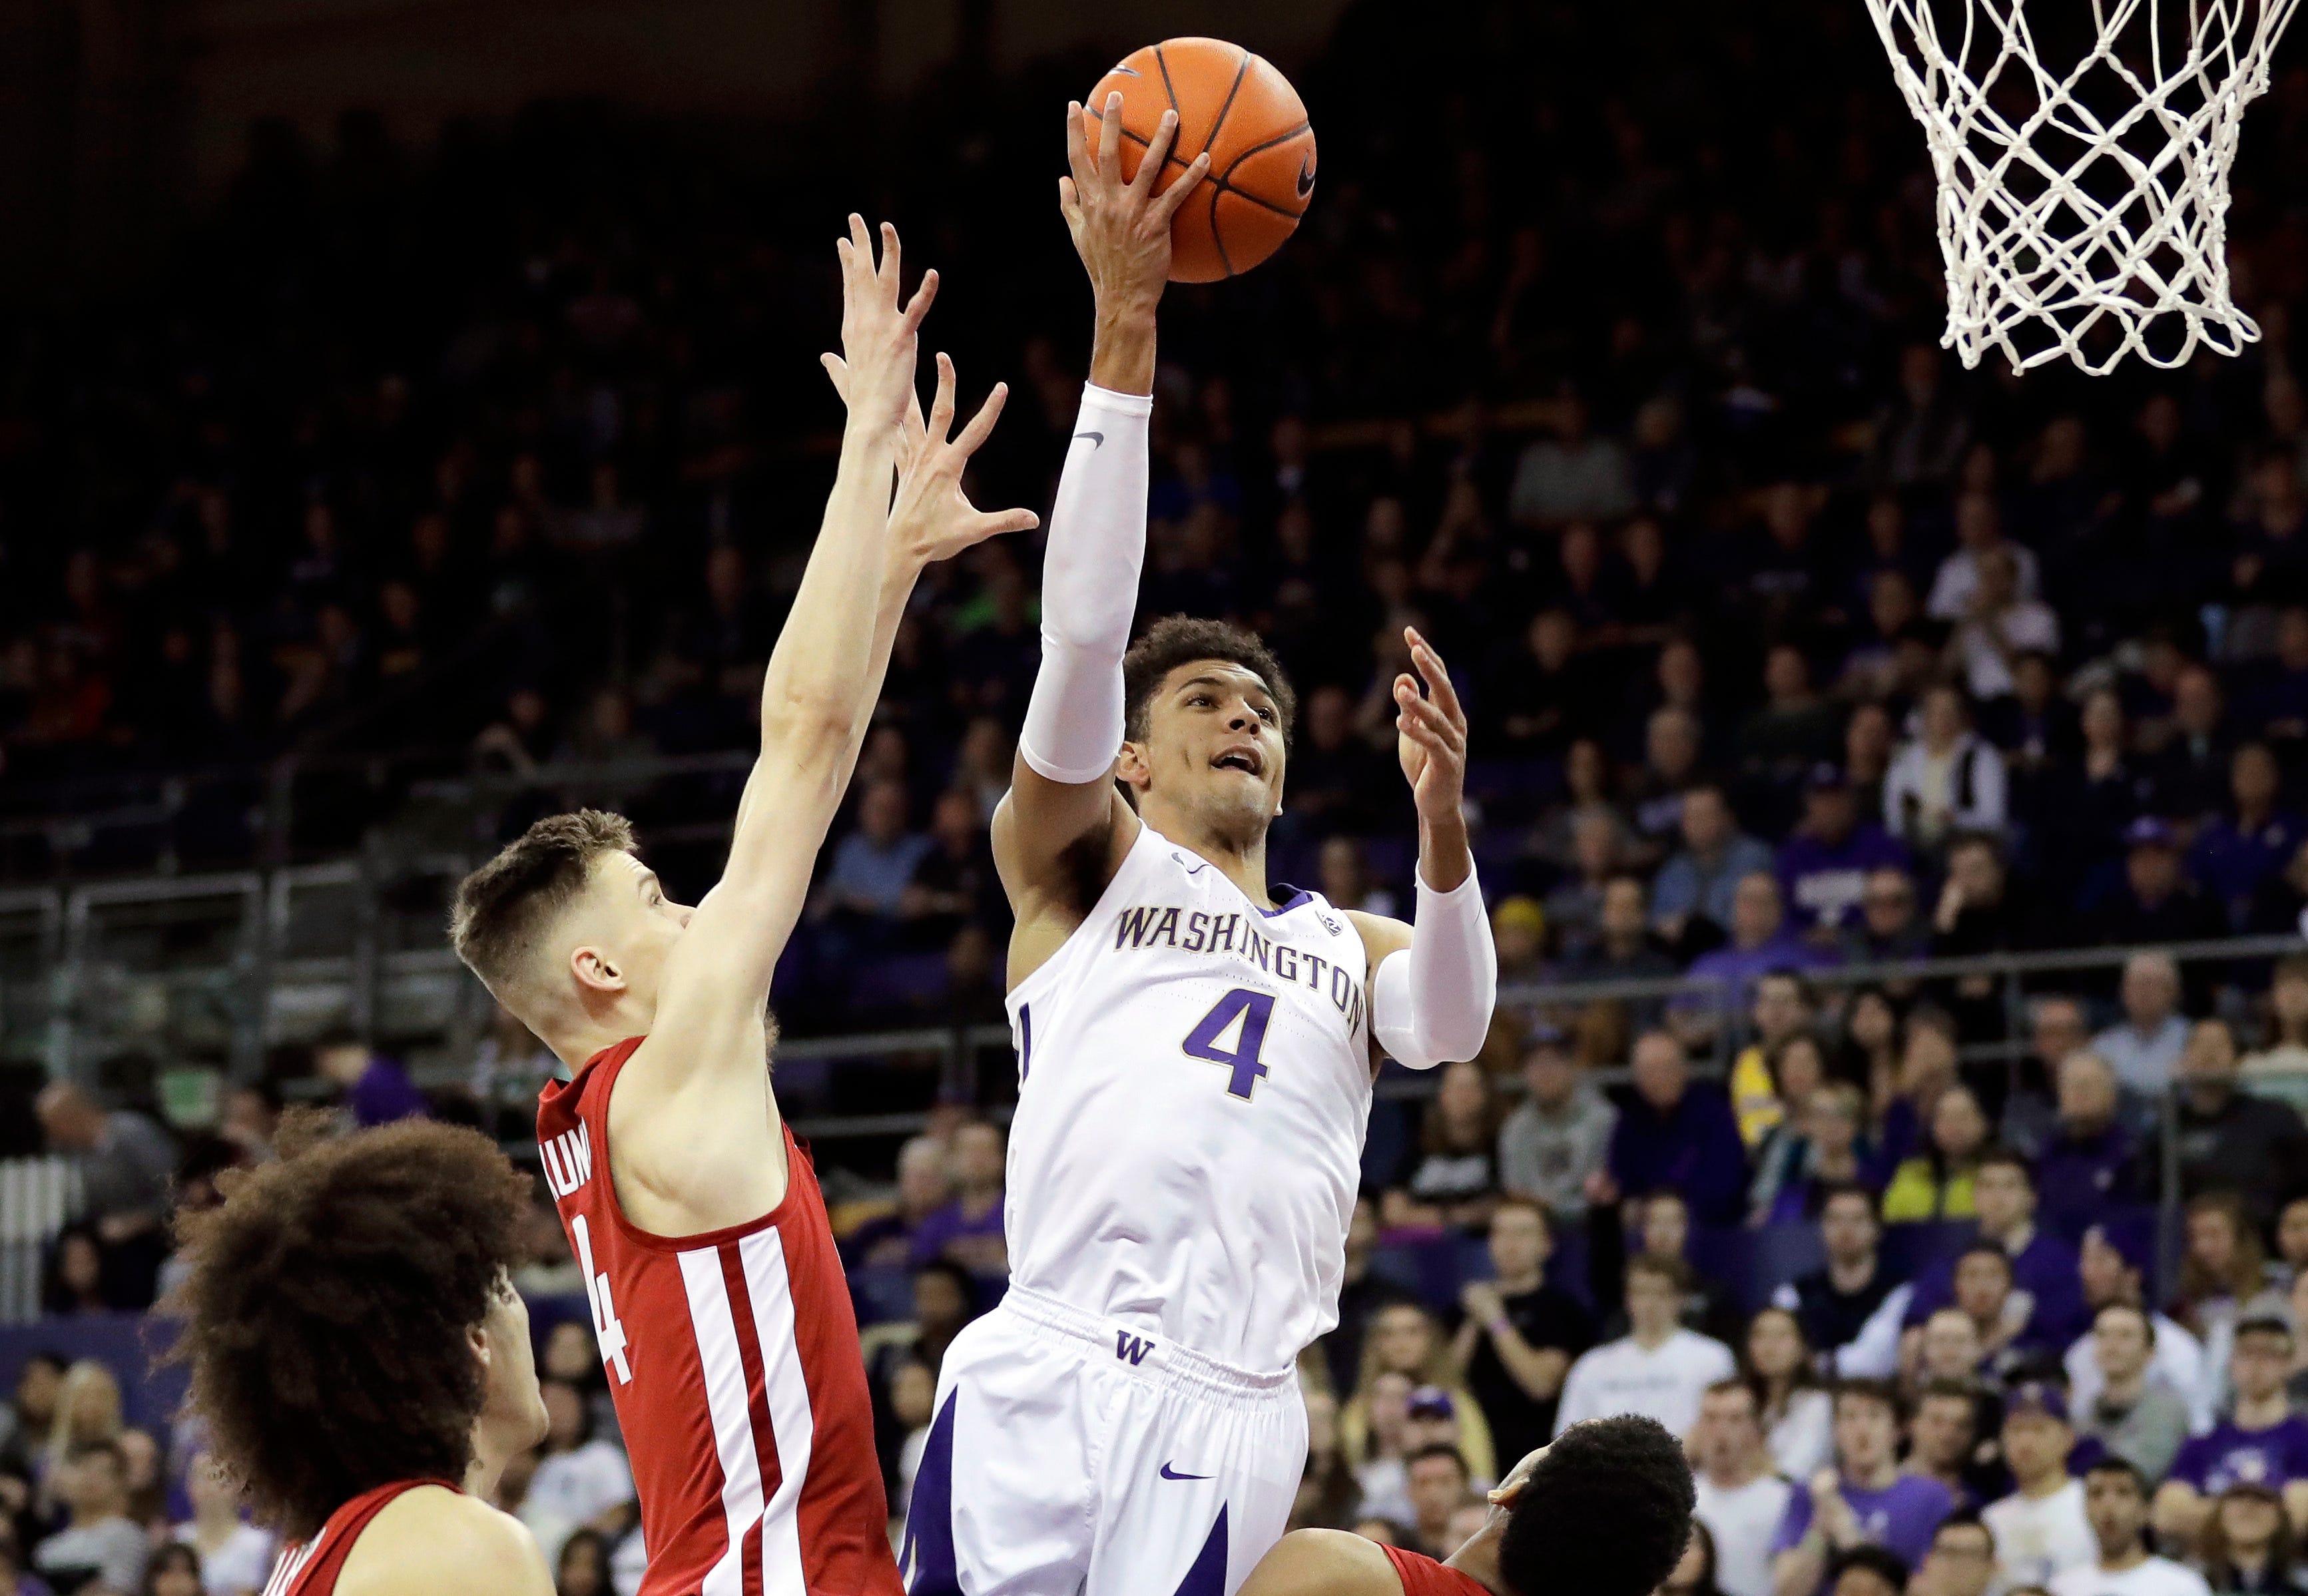 29. San Antonio Spurs: Matisse Thybulle, guard, Washington. The Spurs traditionally have been good talent developers and Thybulle could become a good two-way player with some time. With a focus on defense, he’ll find a way to get playing time with coach Gregg Popovich.